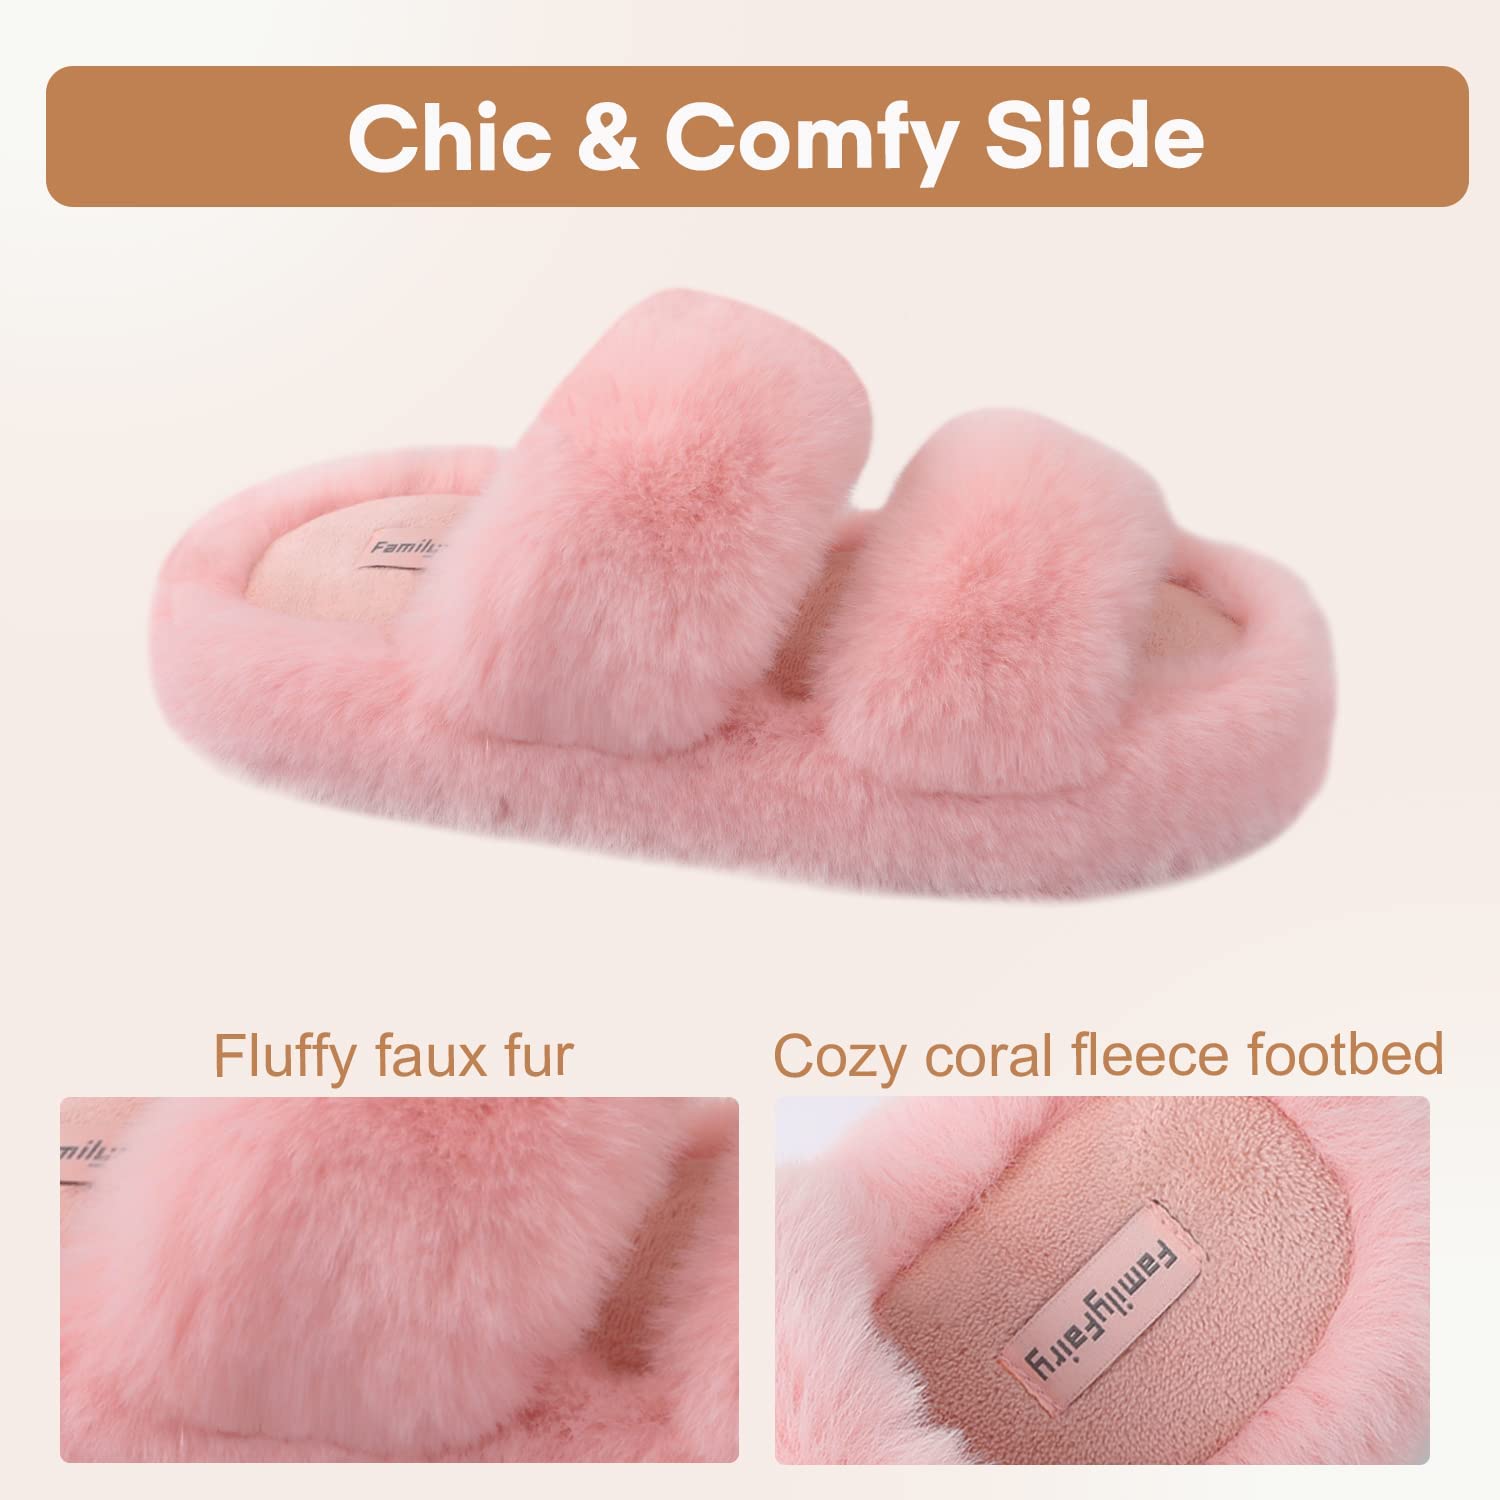 FamilyFairy Women's Fluffy Faux Fur Slippers Comfy Open Toe Two Band Slides with Fleece Lining and Rubber Sole